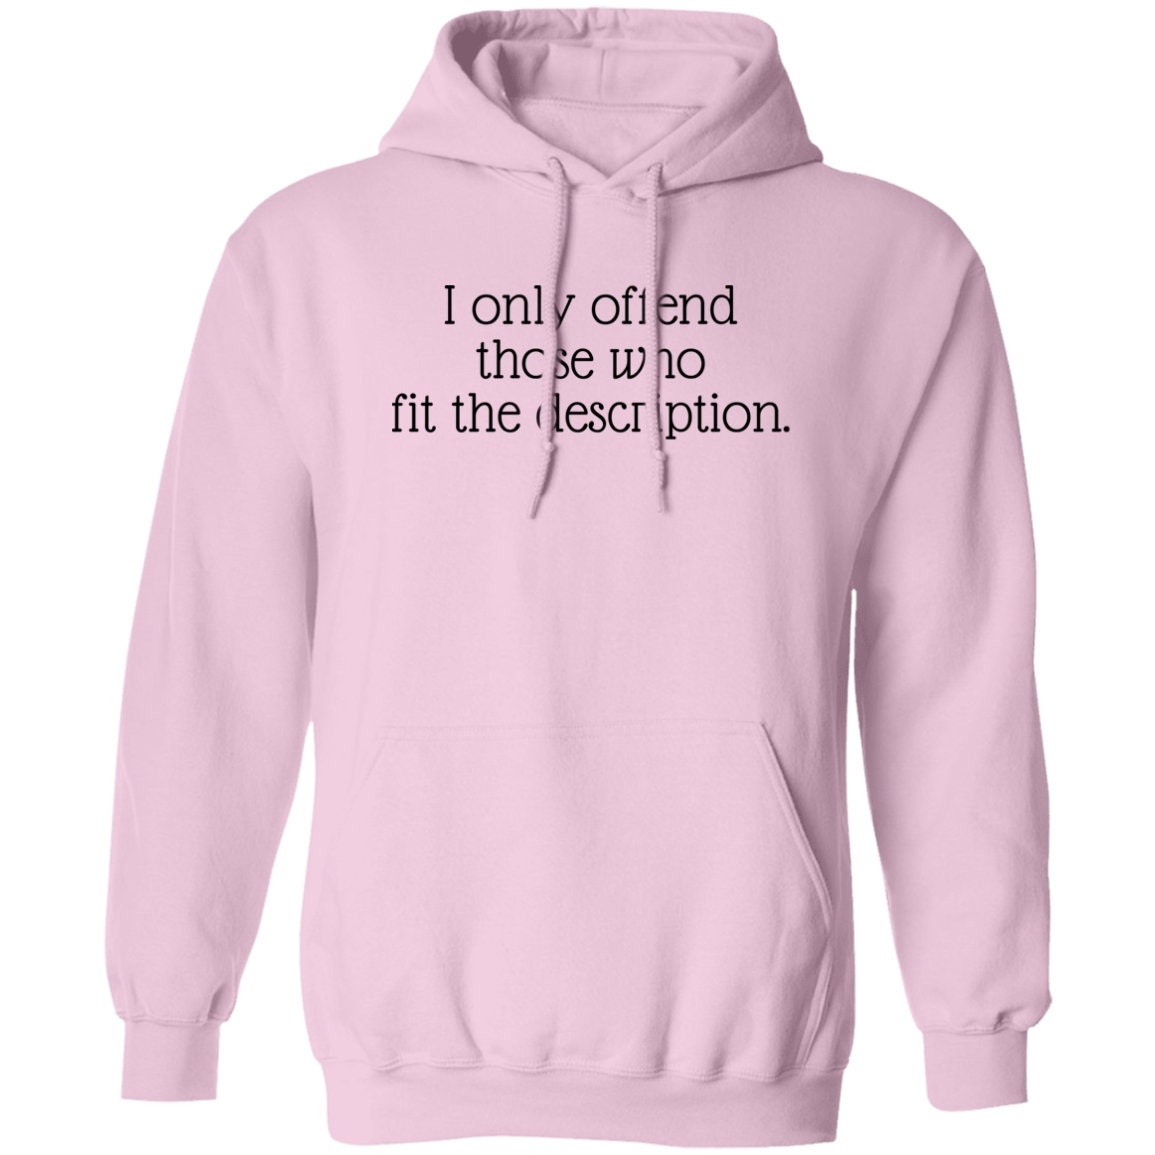 I only offend those who fit the description Hoodie